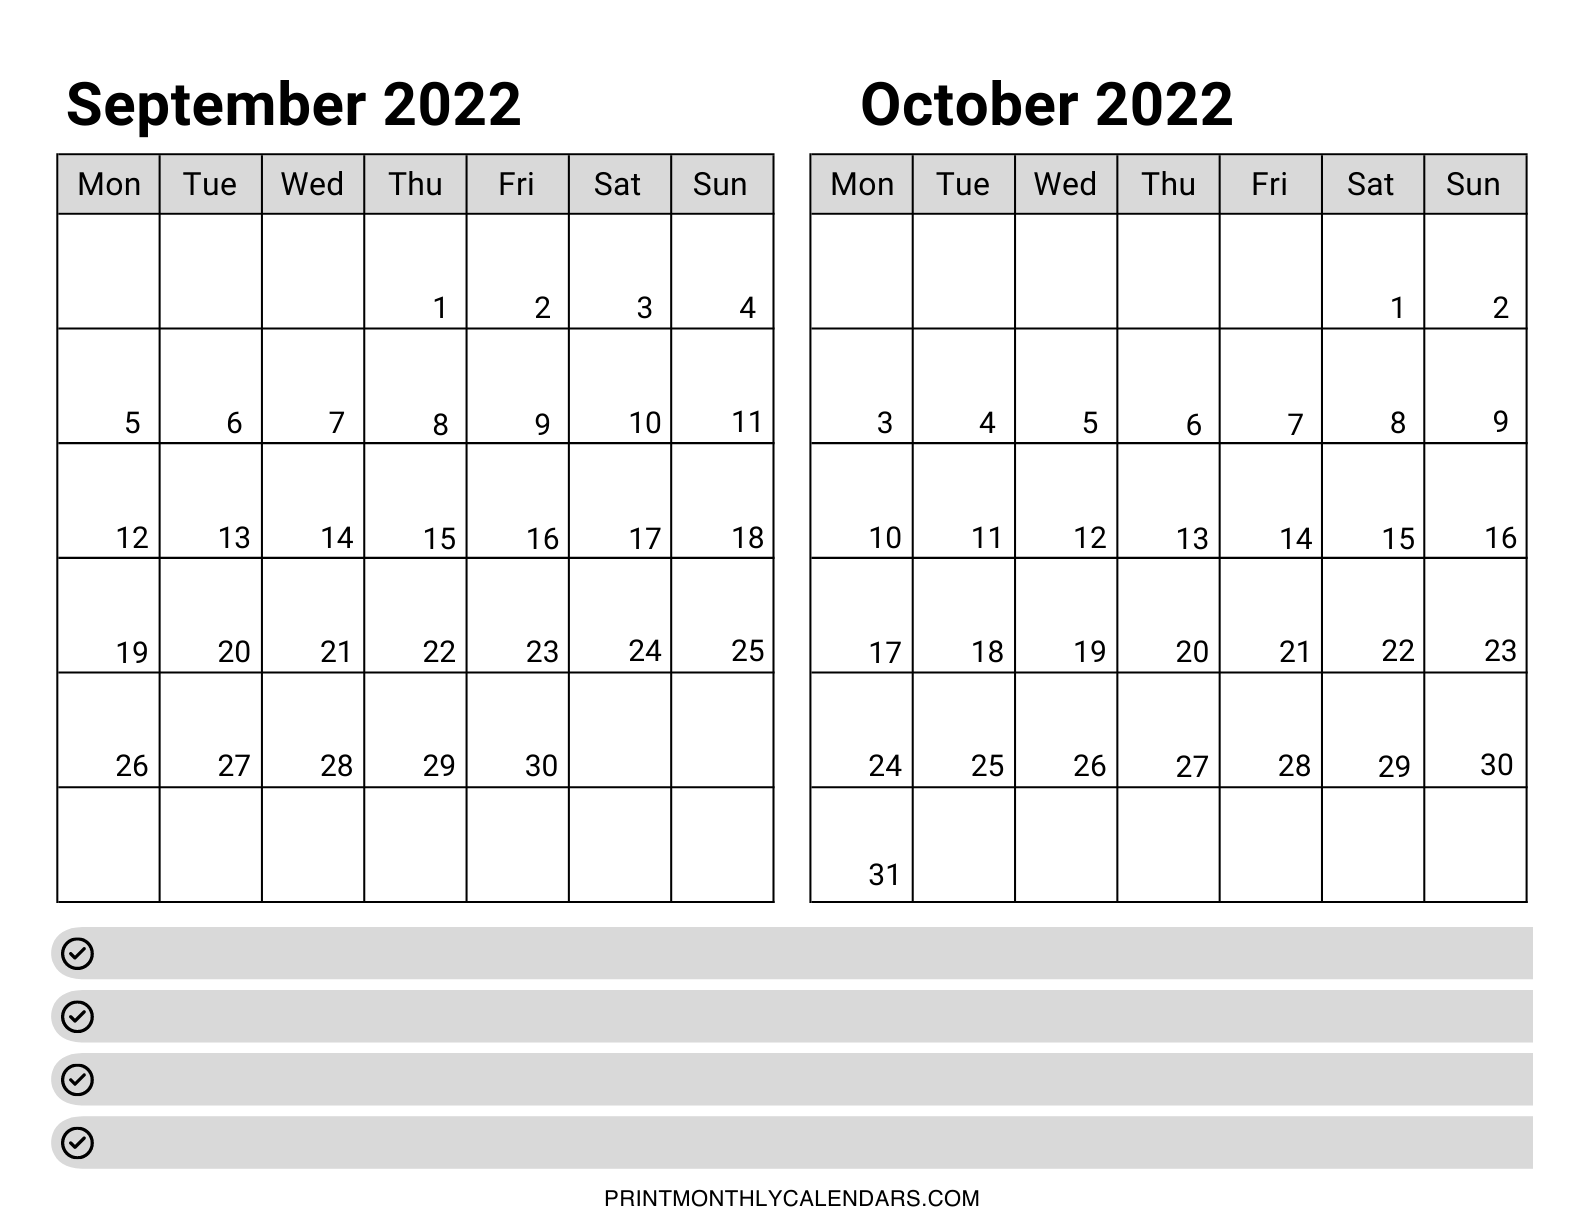 Template for September and October 2022 calendars, with weekdays starting on Monday. The monthly dates are boldly written in the grids, which are laid out in a landscape layout.